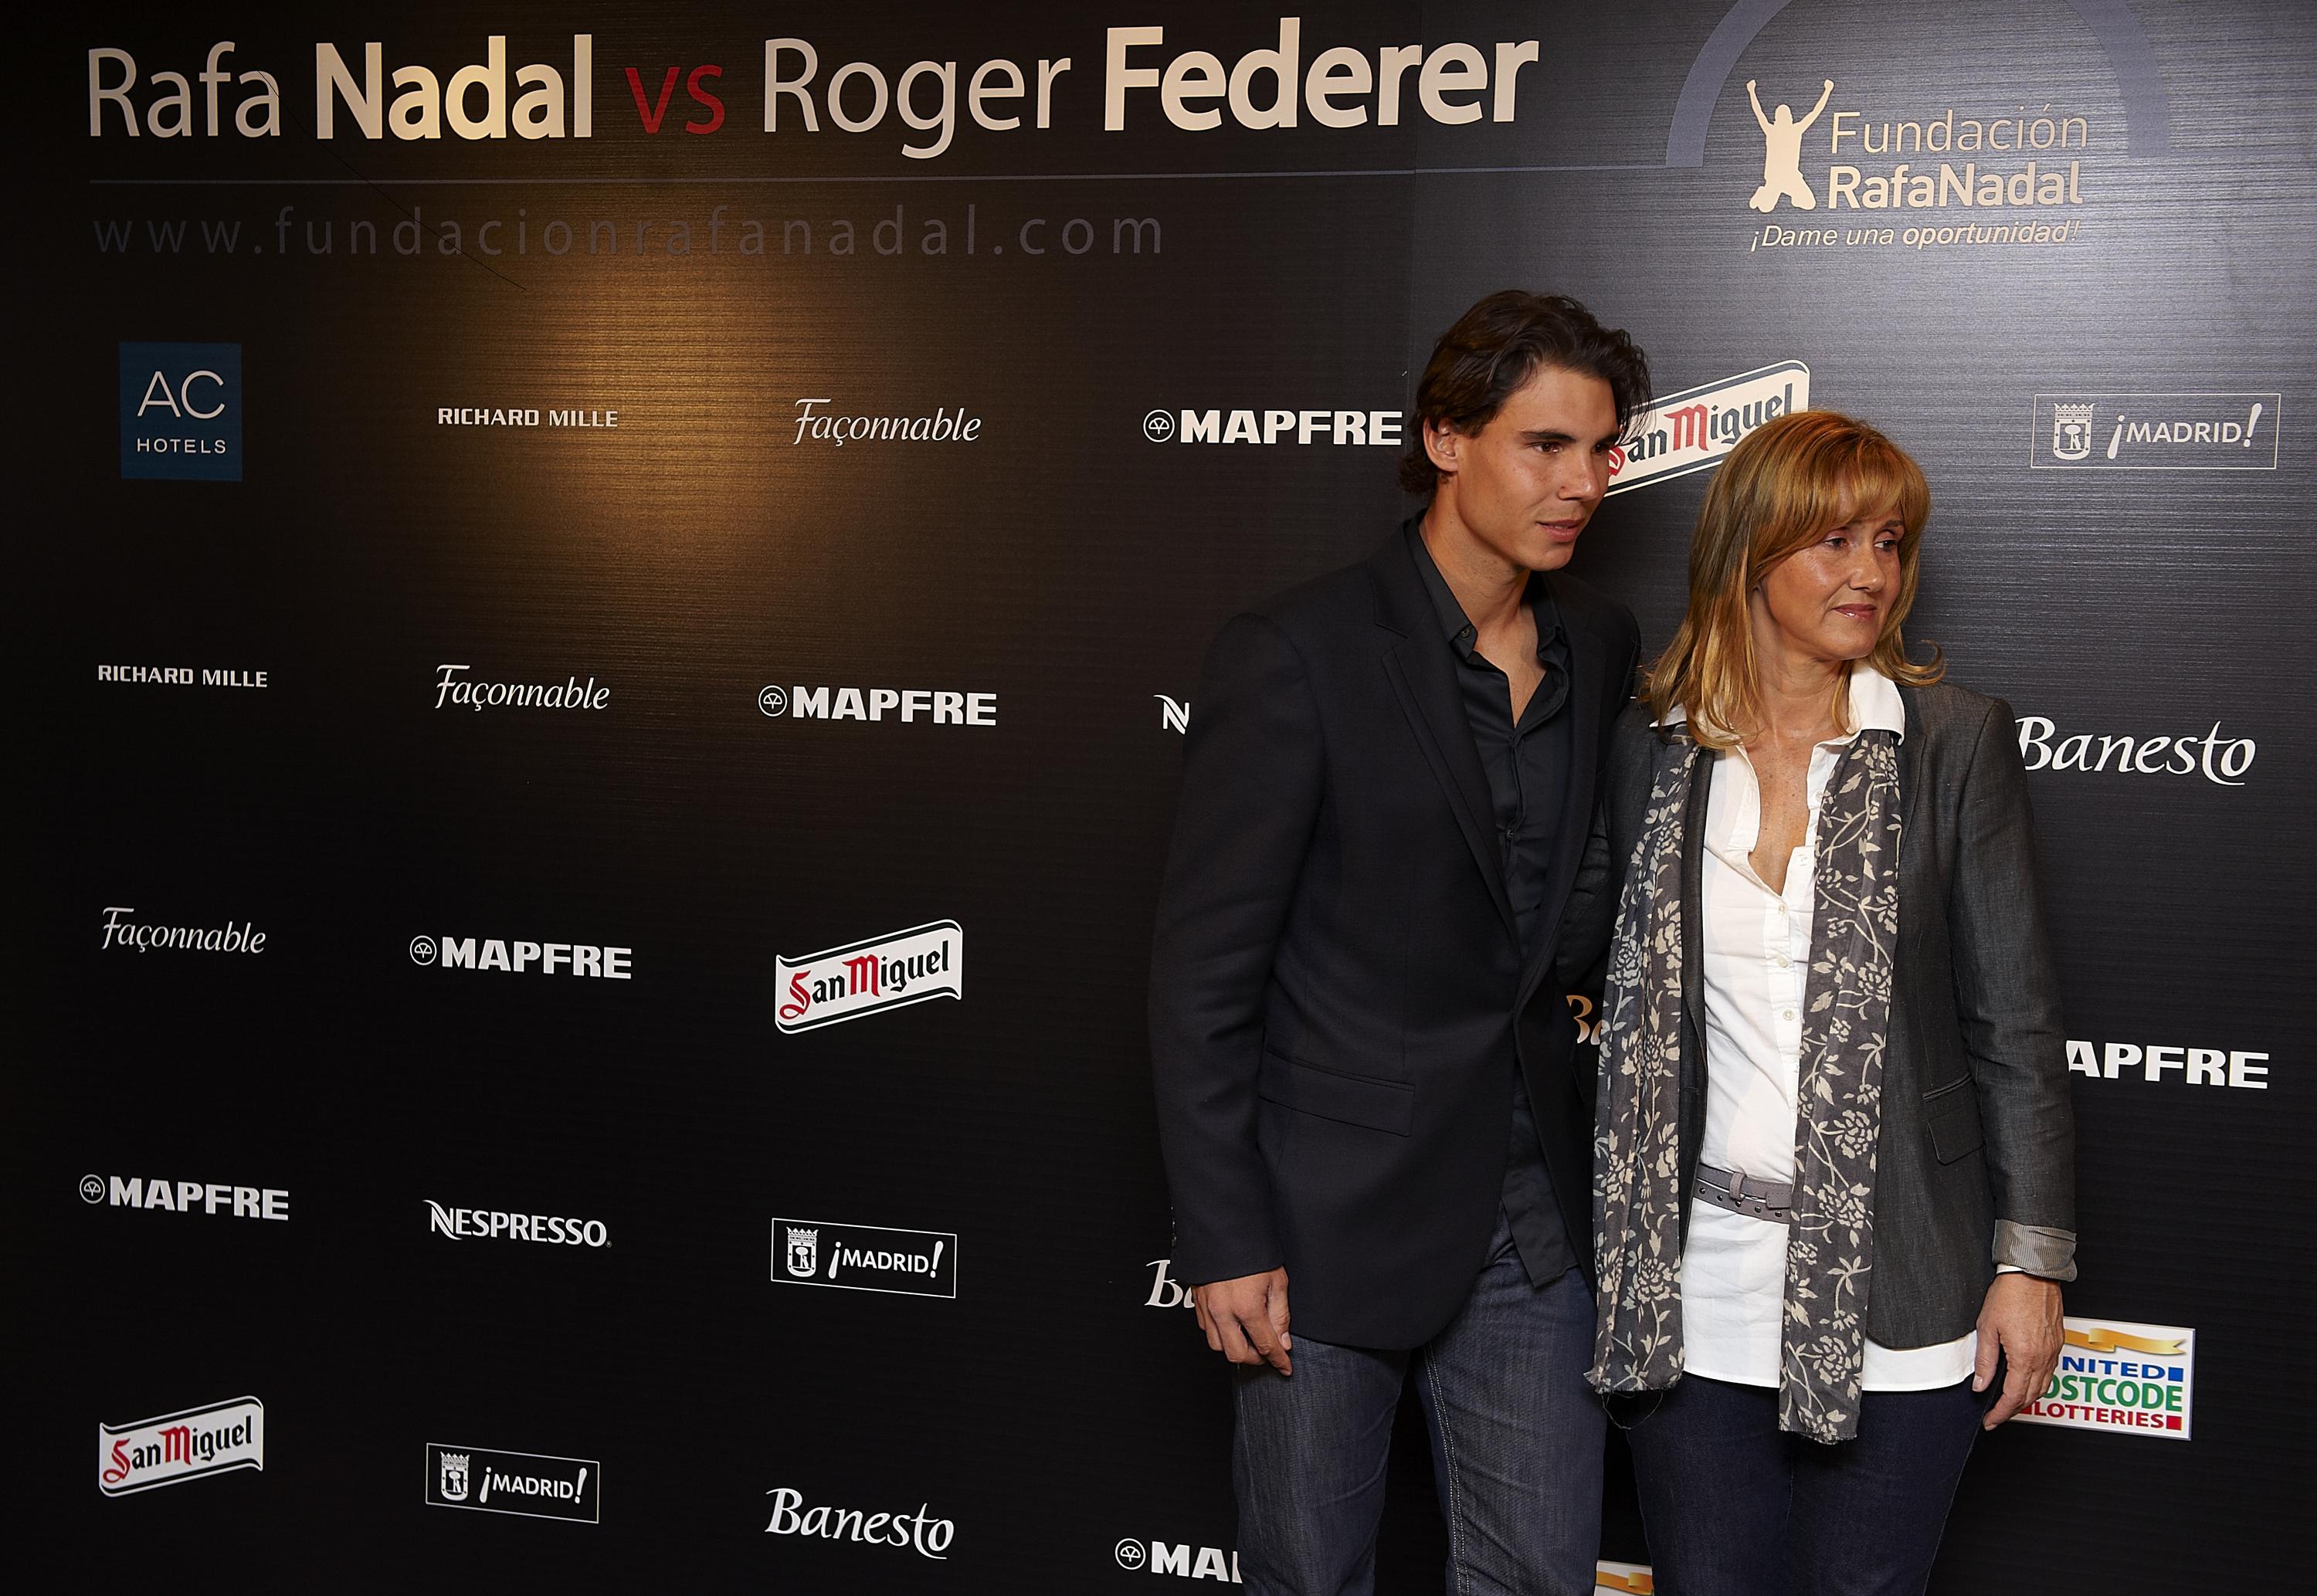 Rafa Nadal and Roger Federer To Play a Match for Charity